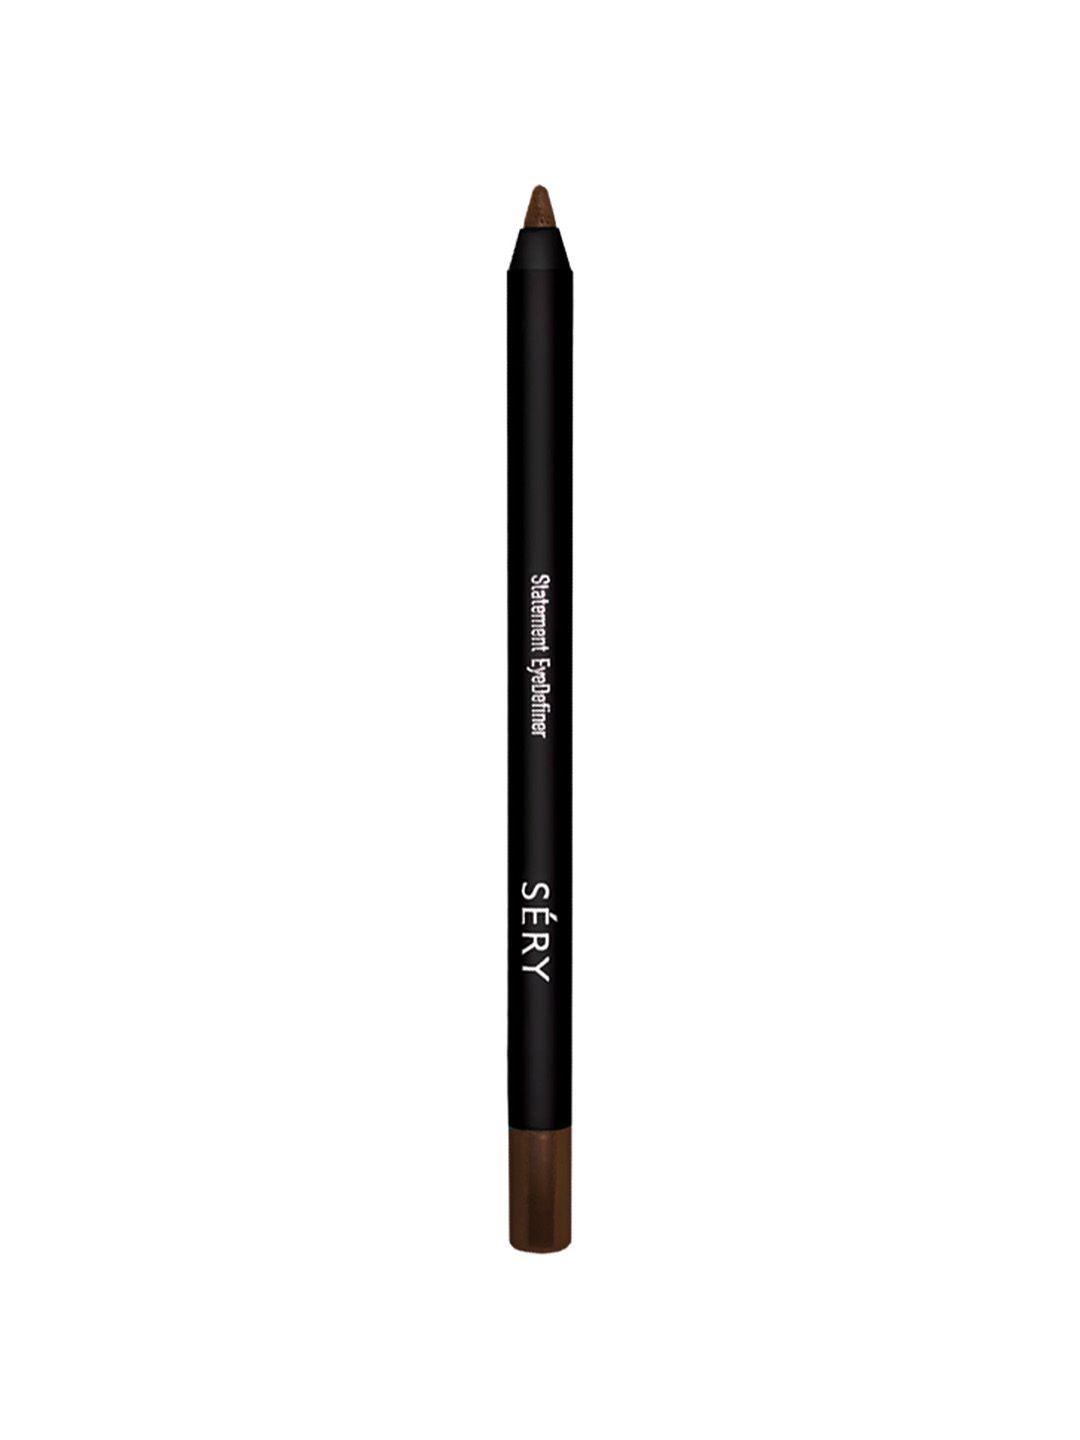 sery statement 24 hours stay gel finish eyeliner 1.2 g - deep brown ep 06